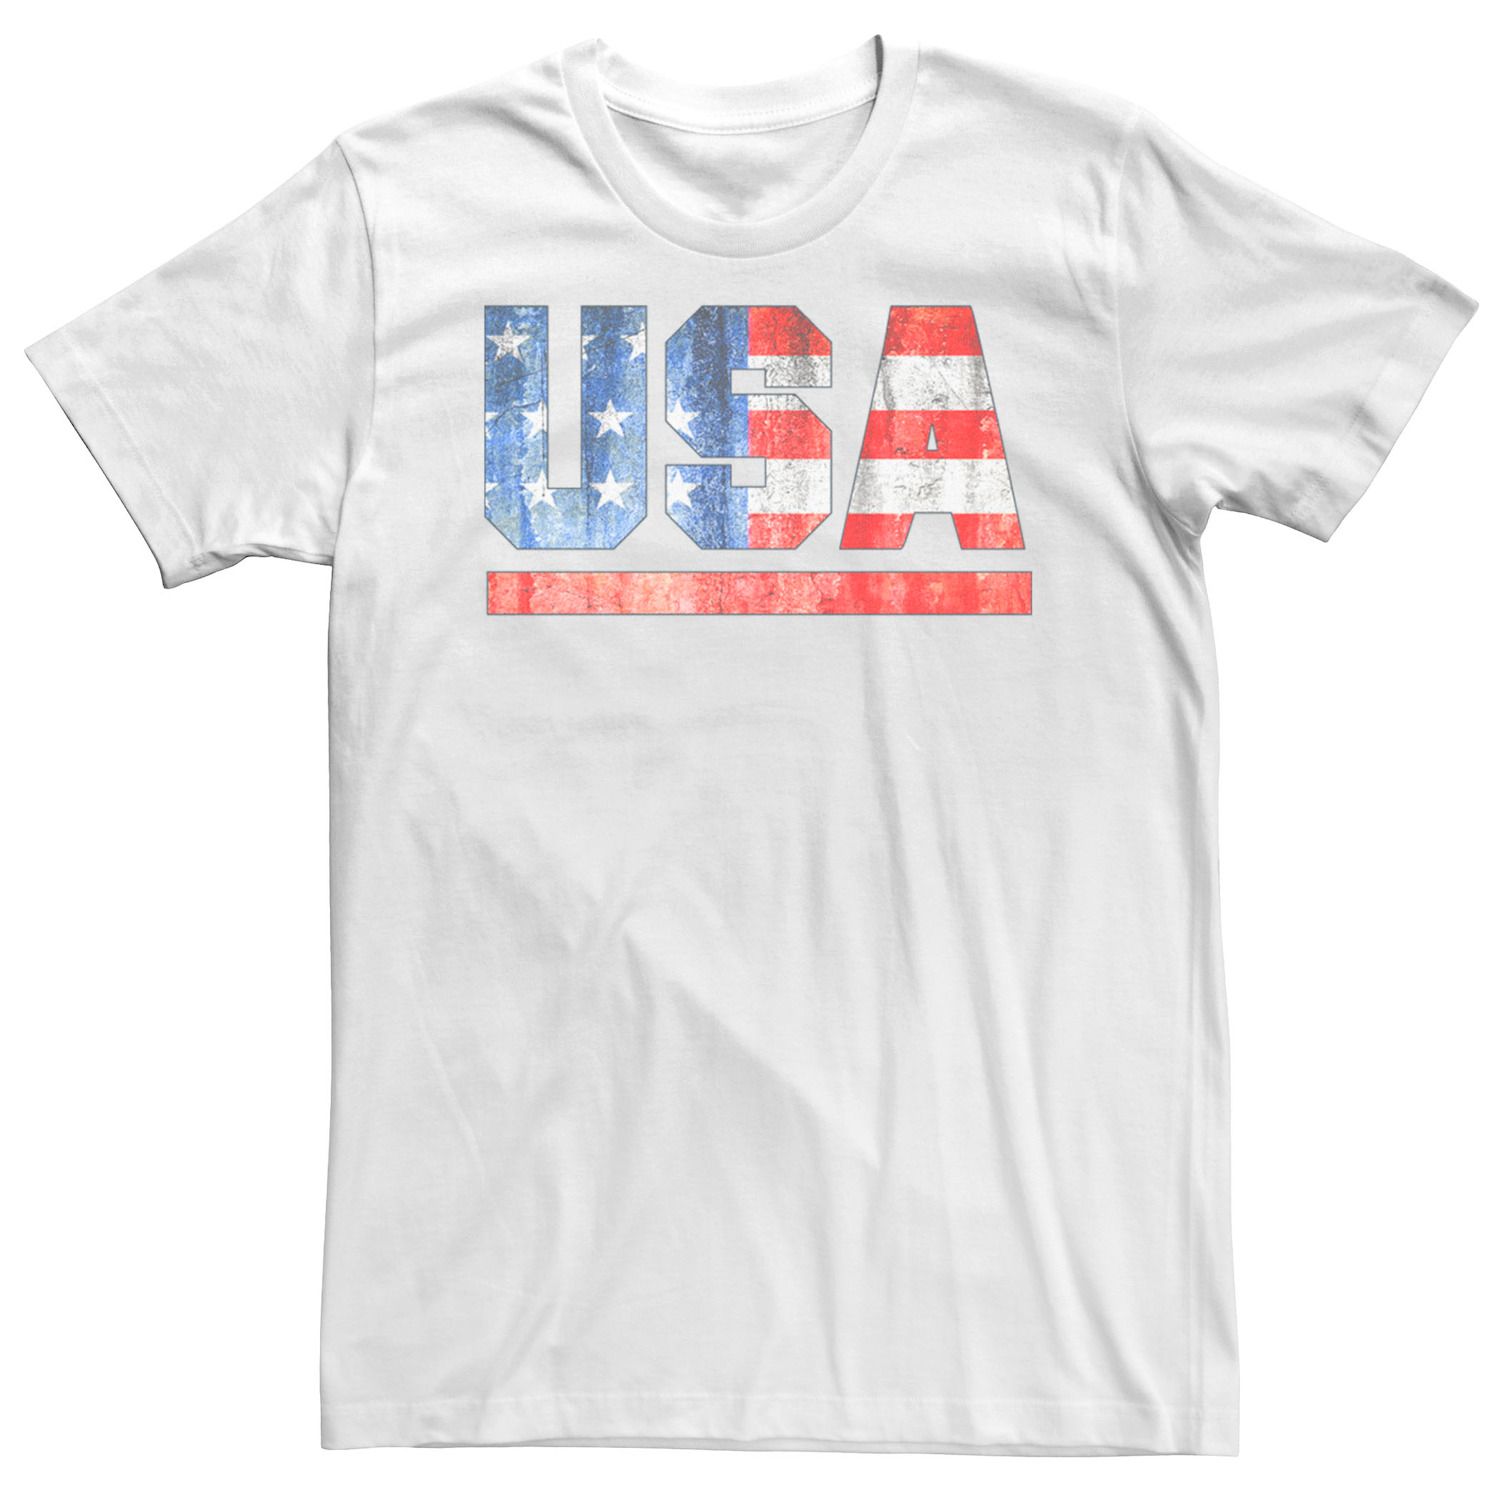 Image for Licensed Character Men's USA American Flag Tee at Kohl's.